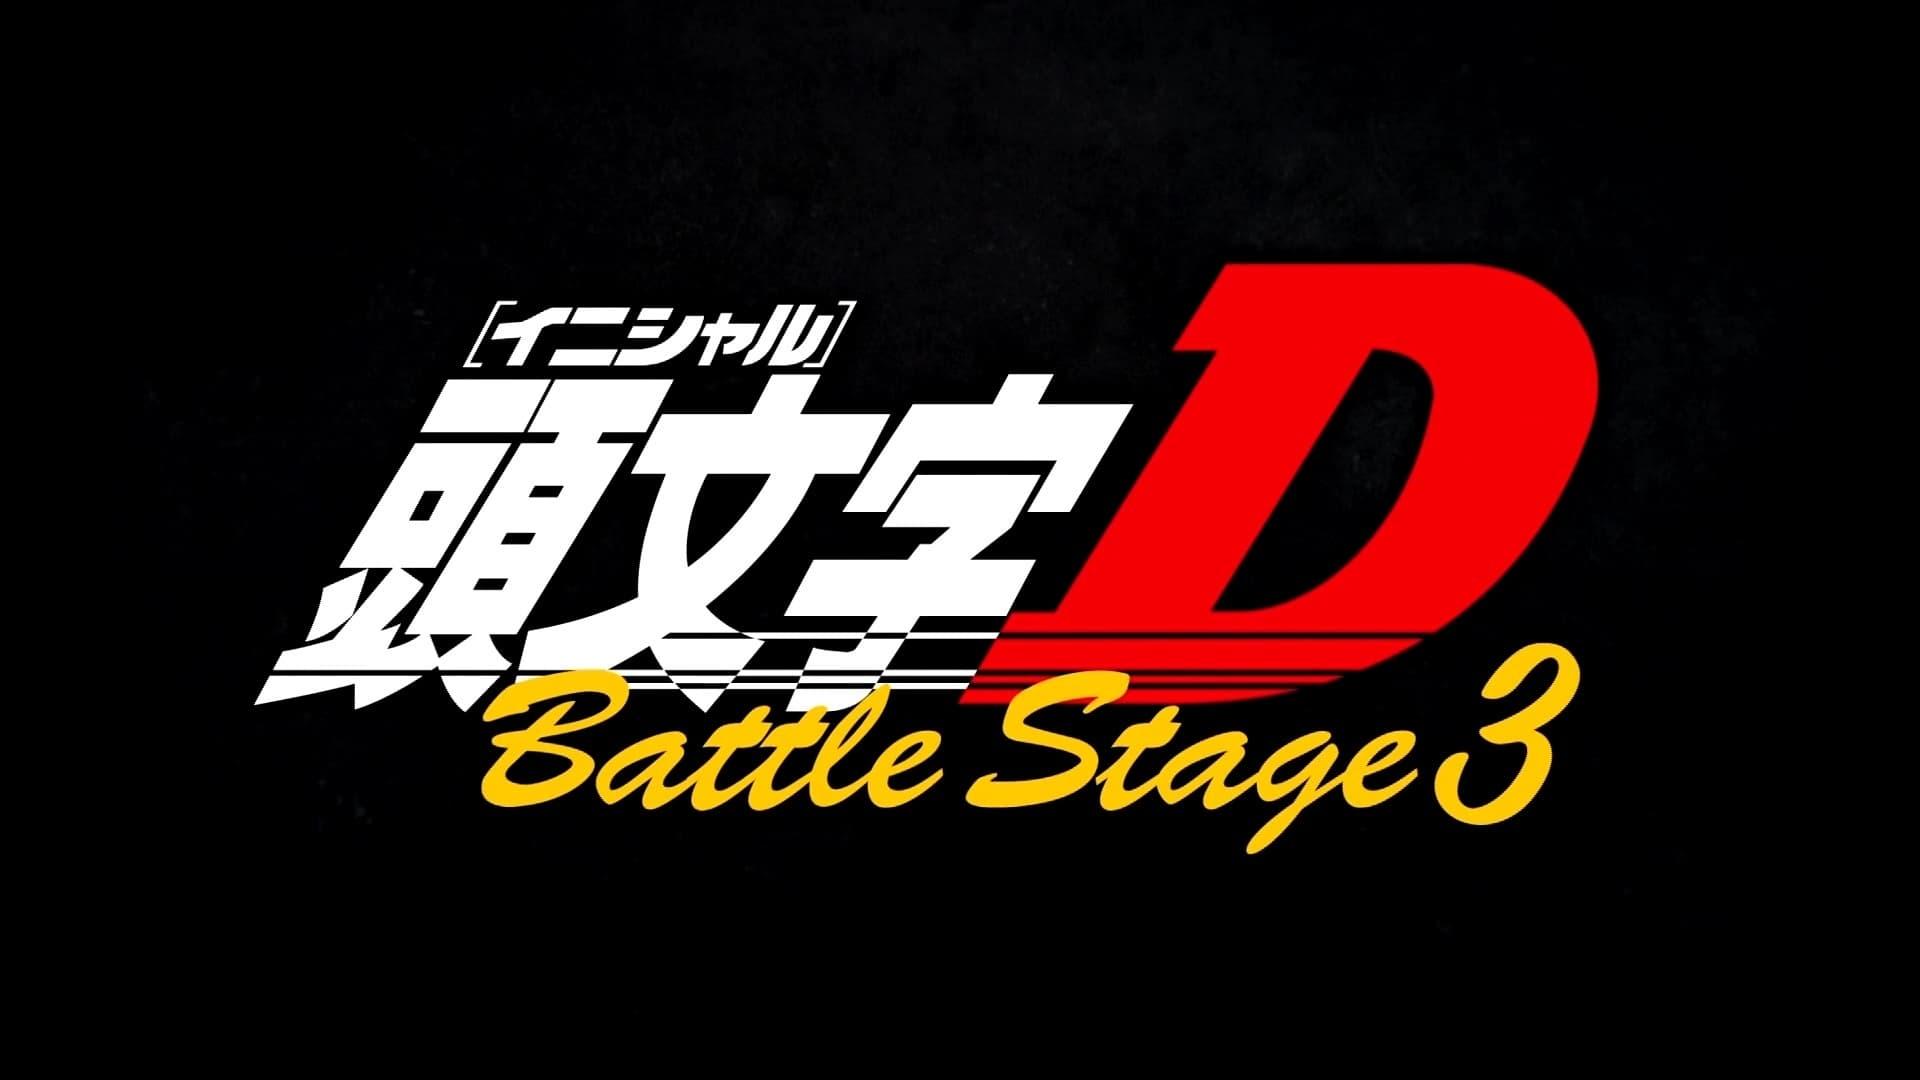 Initial D Battle Stage 3 backdrop